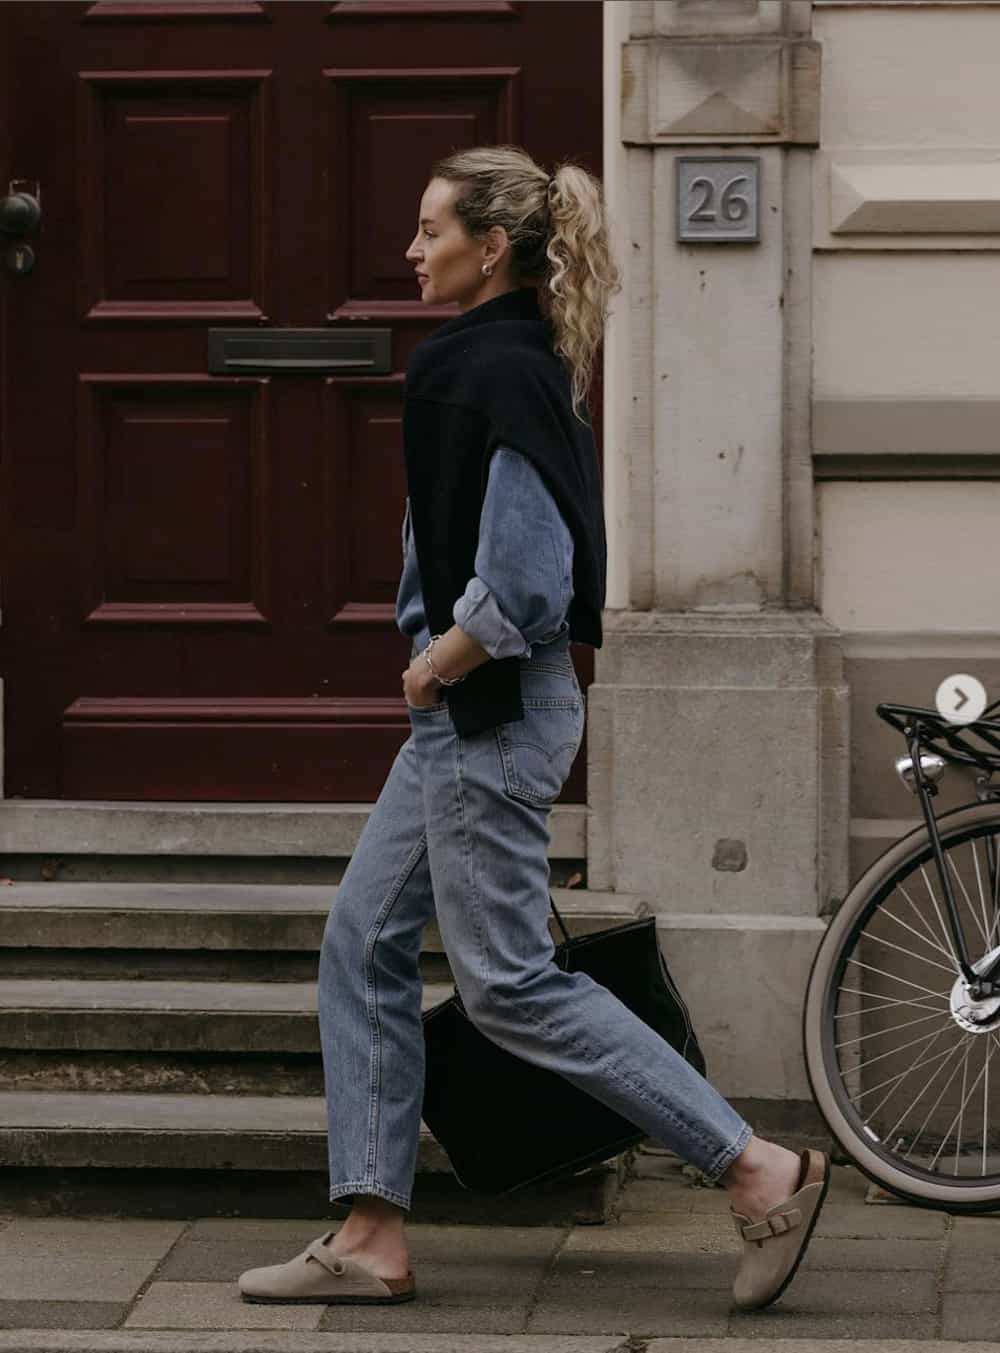 image of a woman walking down the sidewalk in a denim shirt, jeans, and mules with a sweater over her shoulders